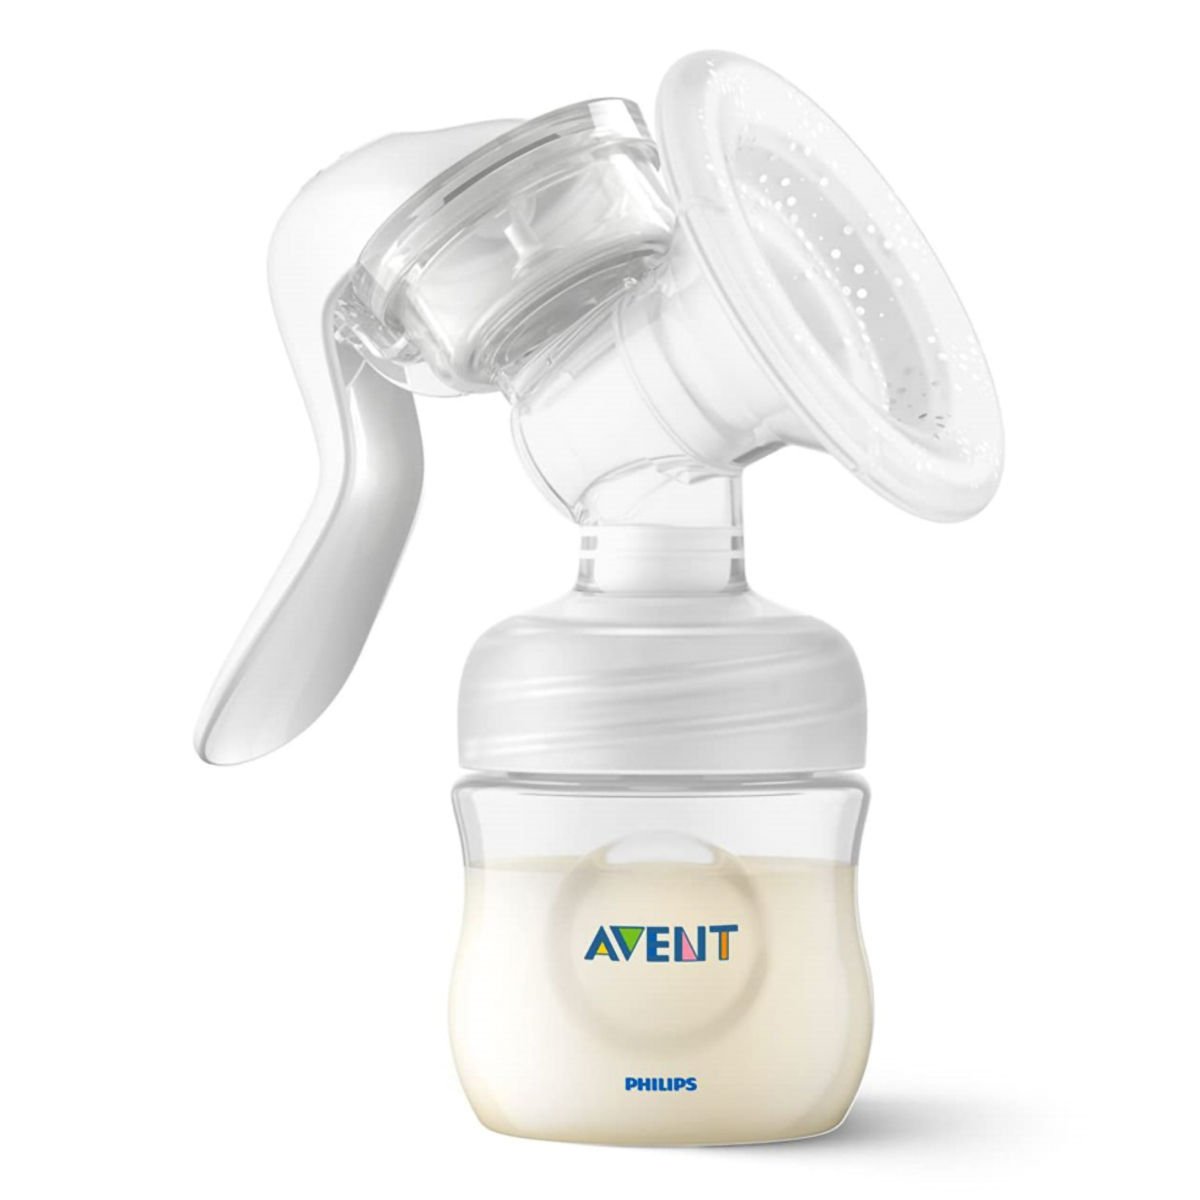 Buy Philips Avent Manual Breast Pump, 1 Count Online